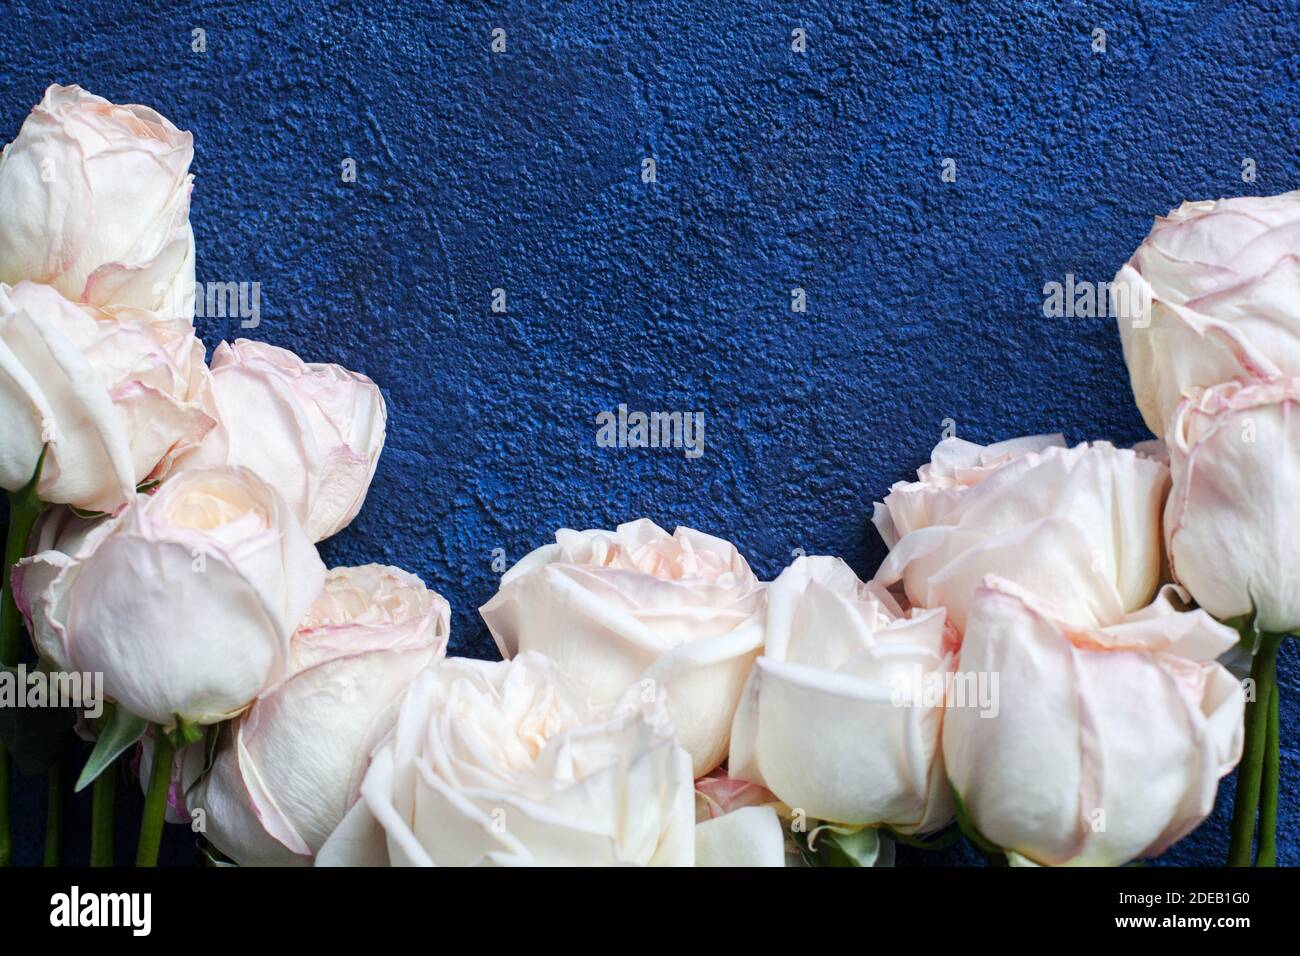 Happy Birthday Card with Bouquet of Pink Roses Stock Photo - Alamy